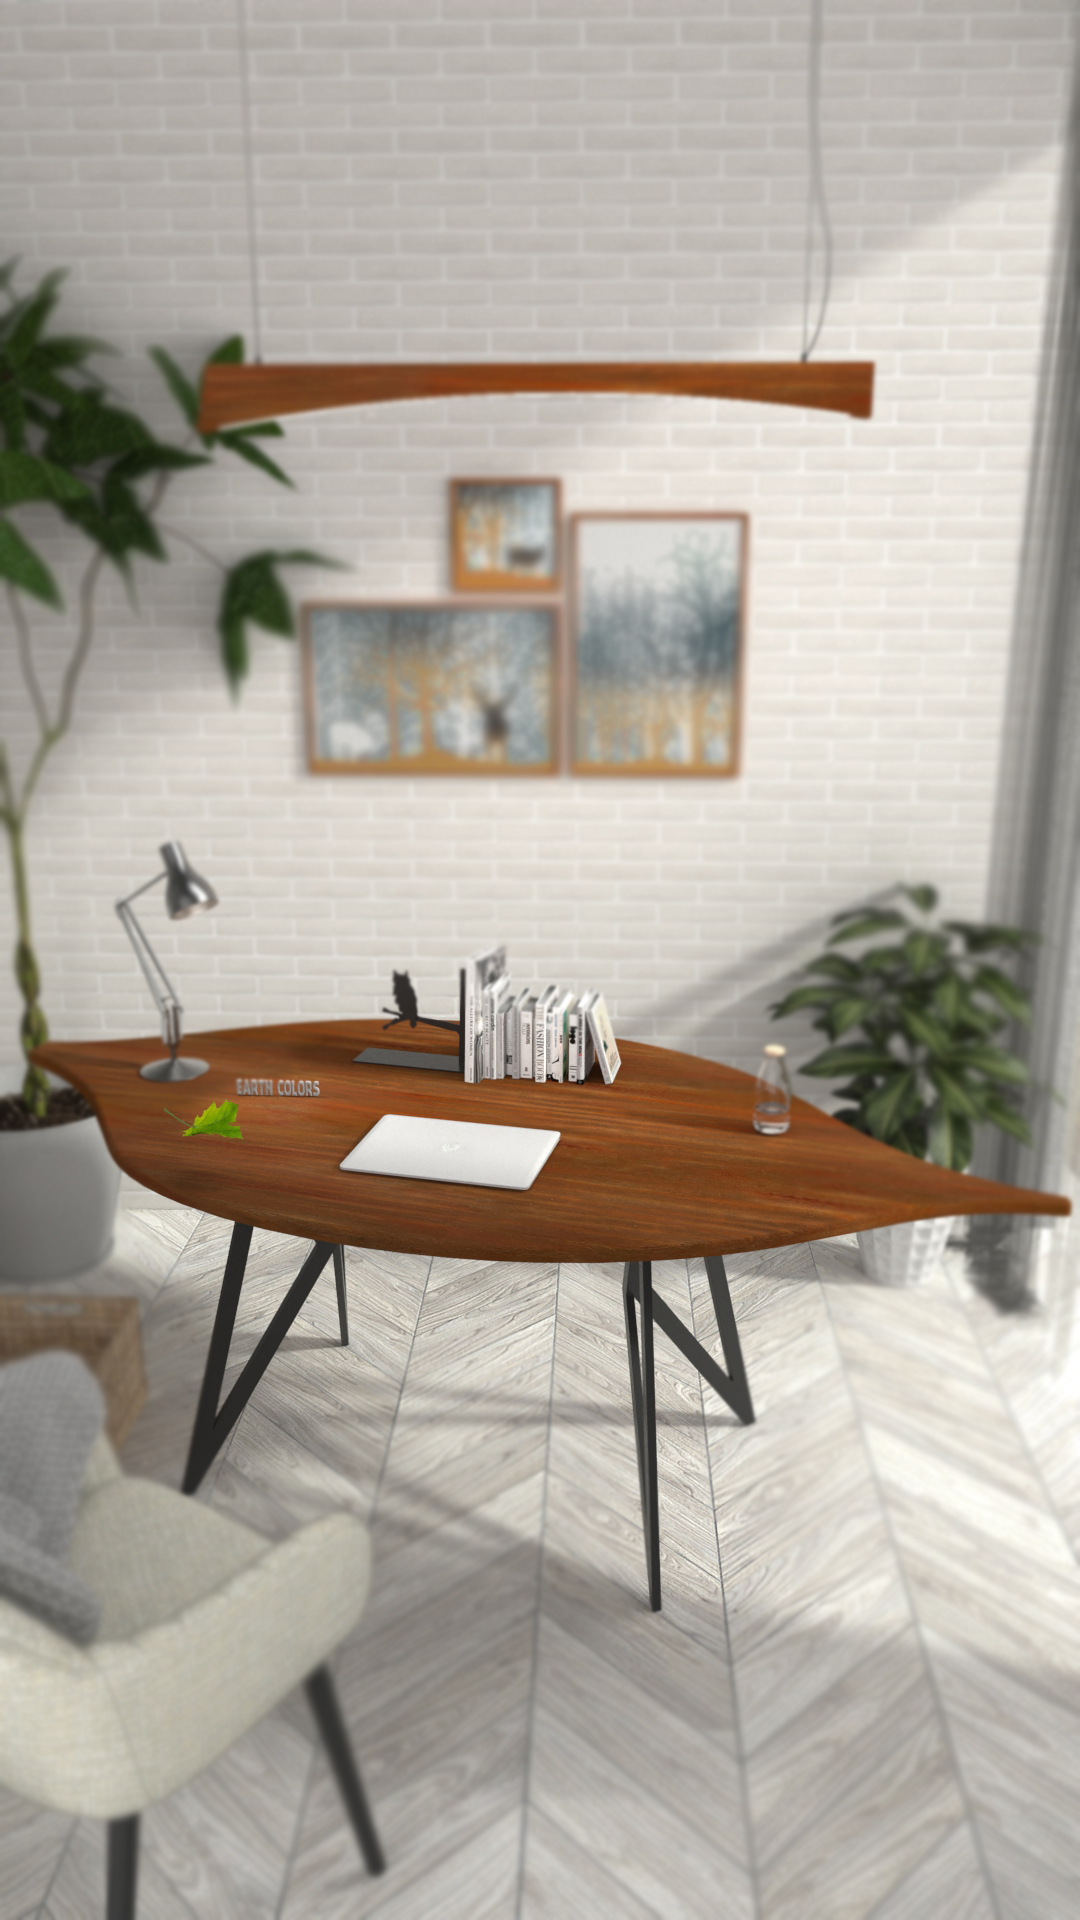 EARTHCOLORS provides Computer table price for your home